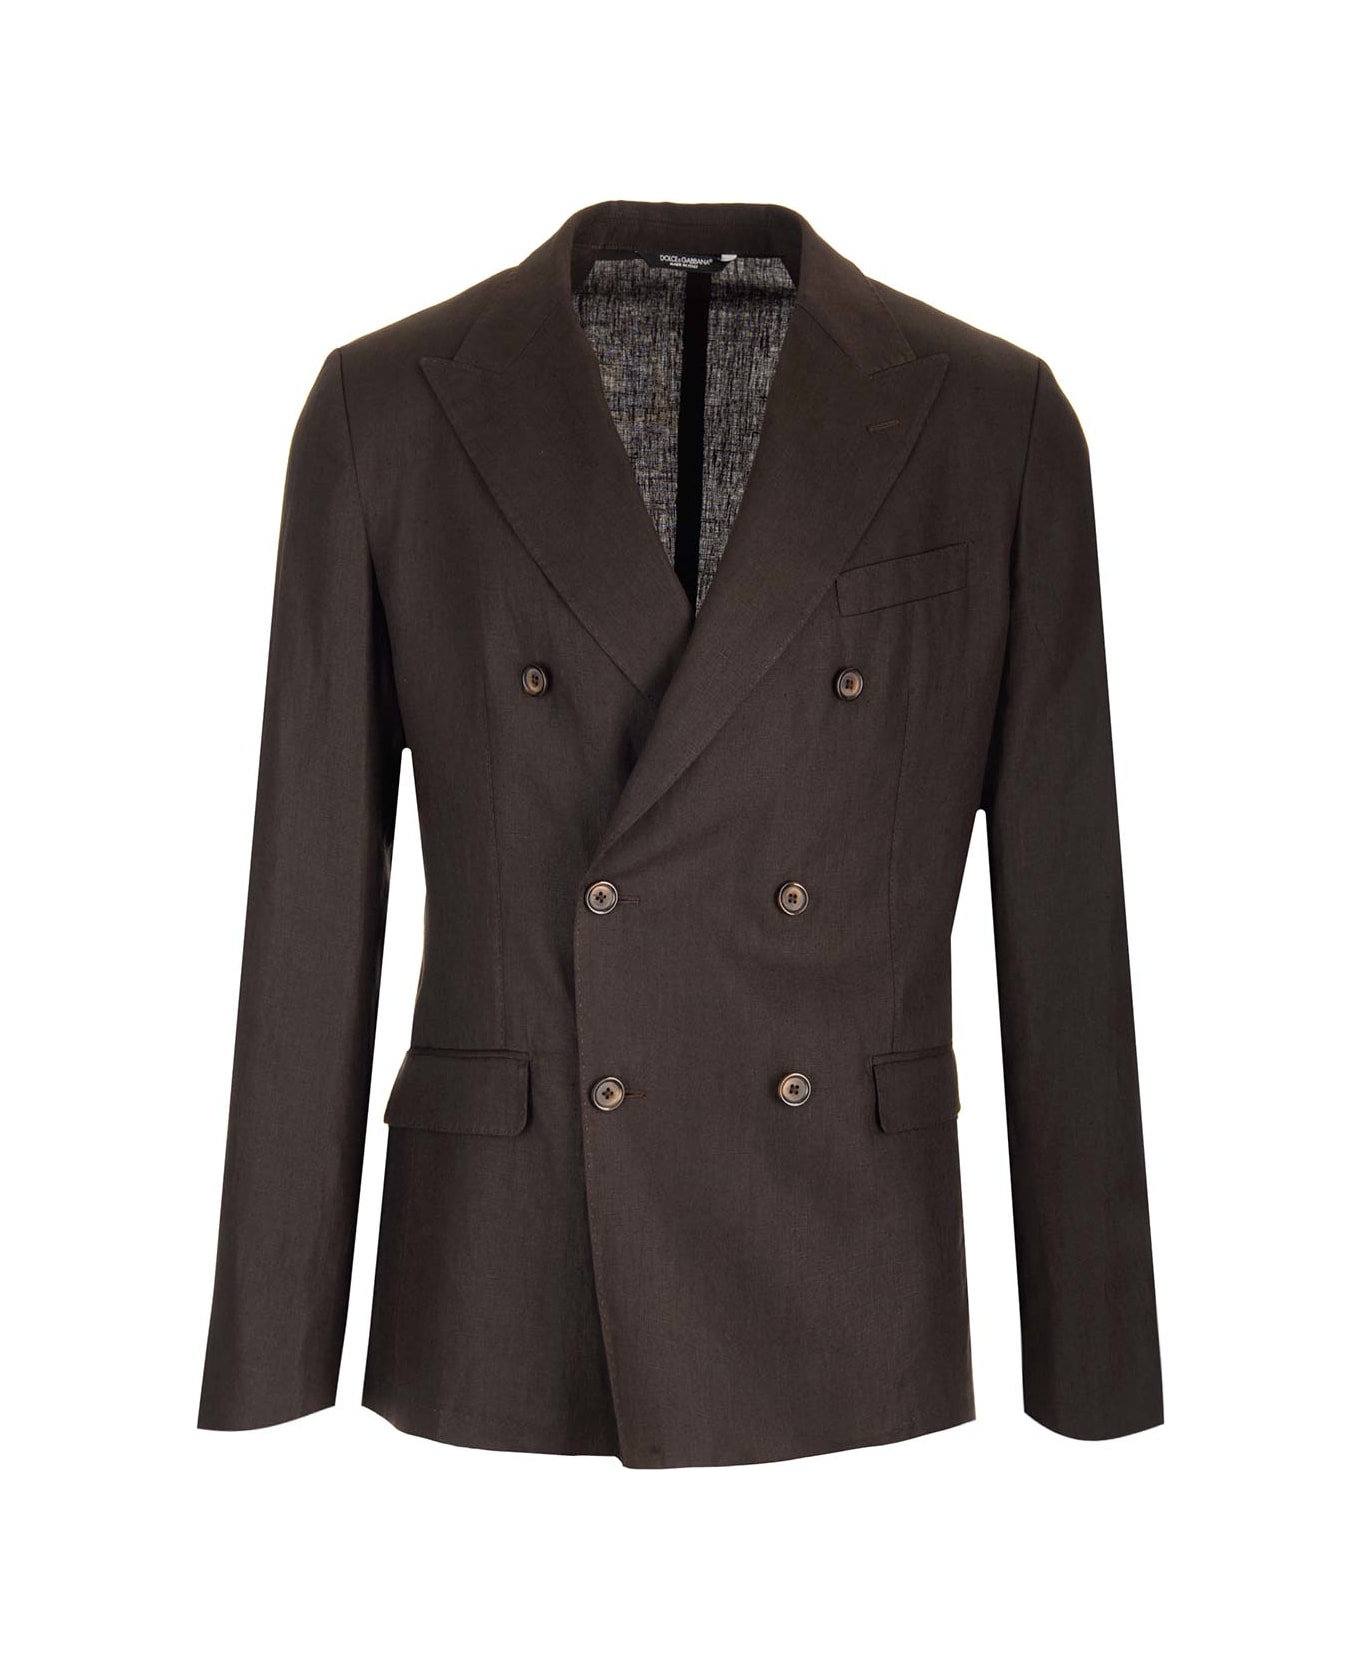 Dolce & Gabbana Double-breasted Jacket - Brown